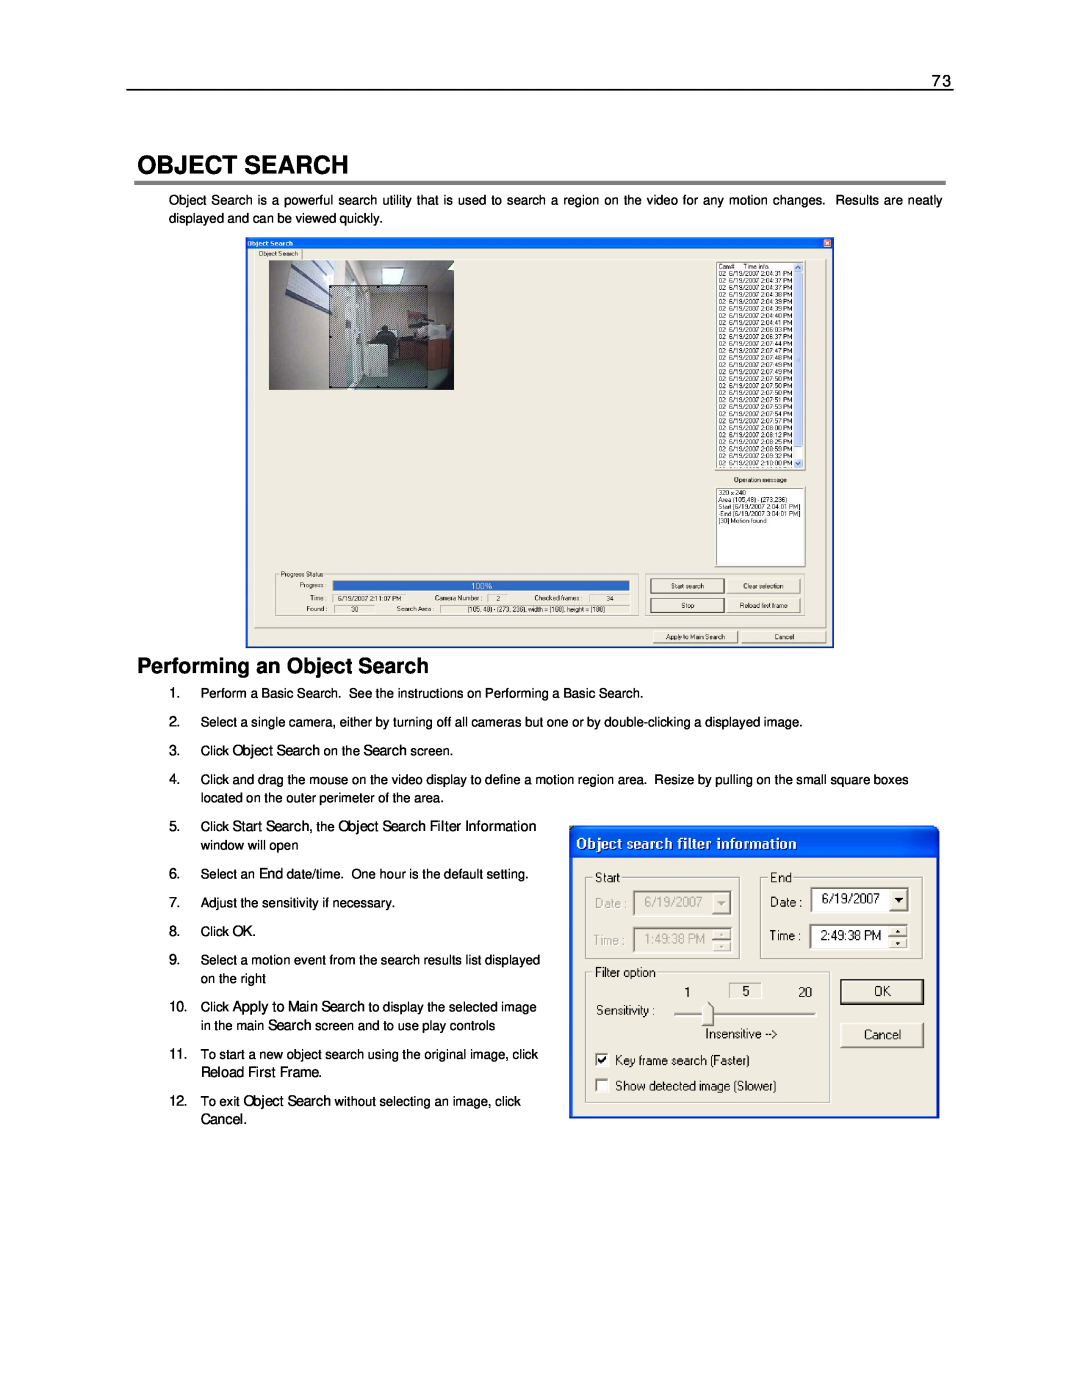 Toshiba NVS16-X, NVS32-X, NVS8-X user manual Performing an Object Search, Click Object Search on the Search screen 